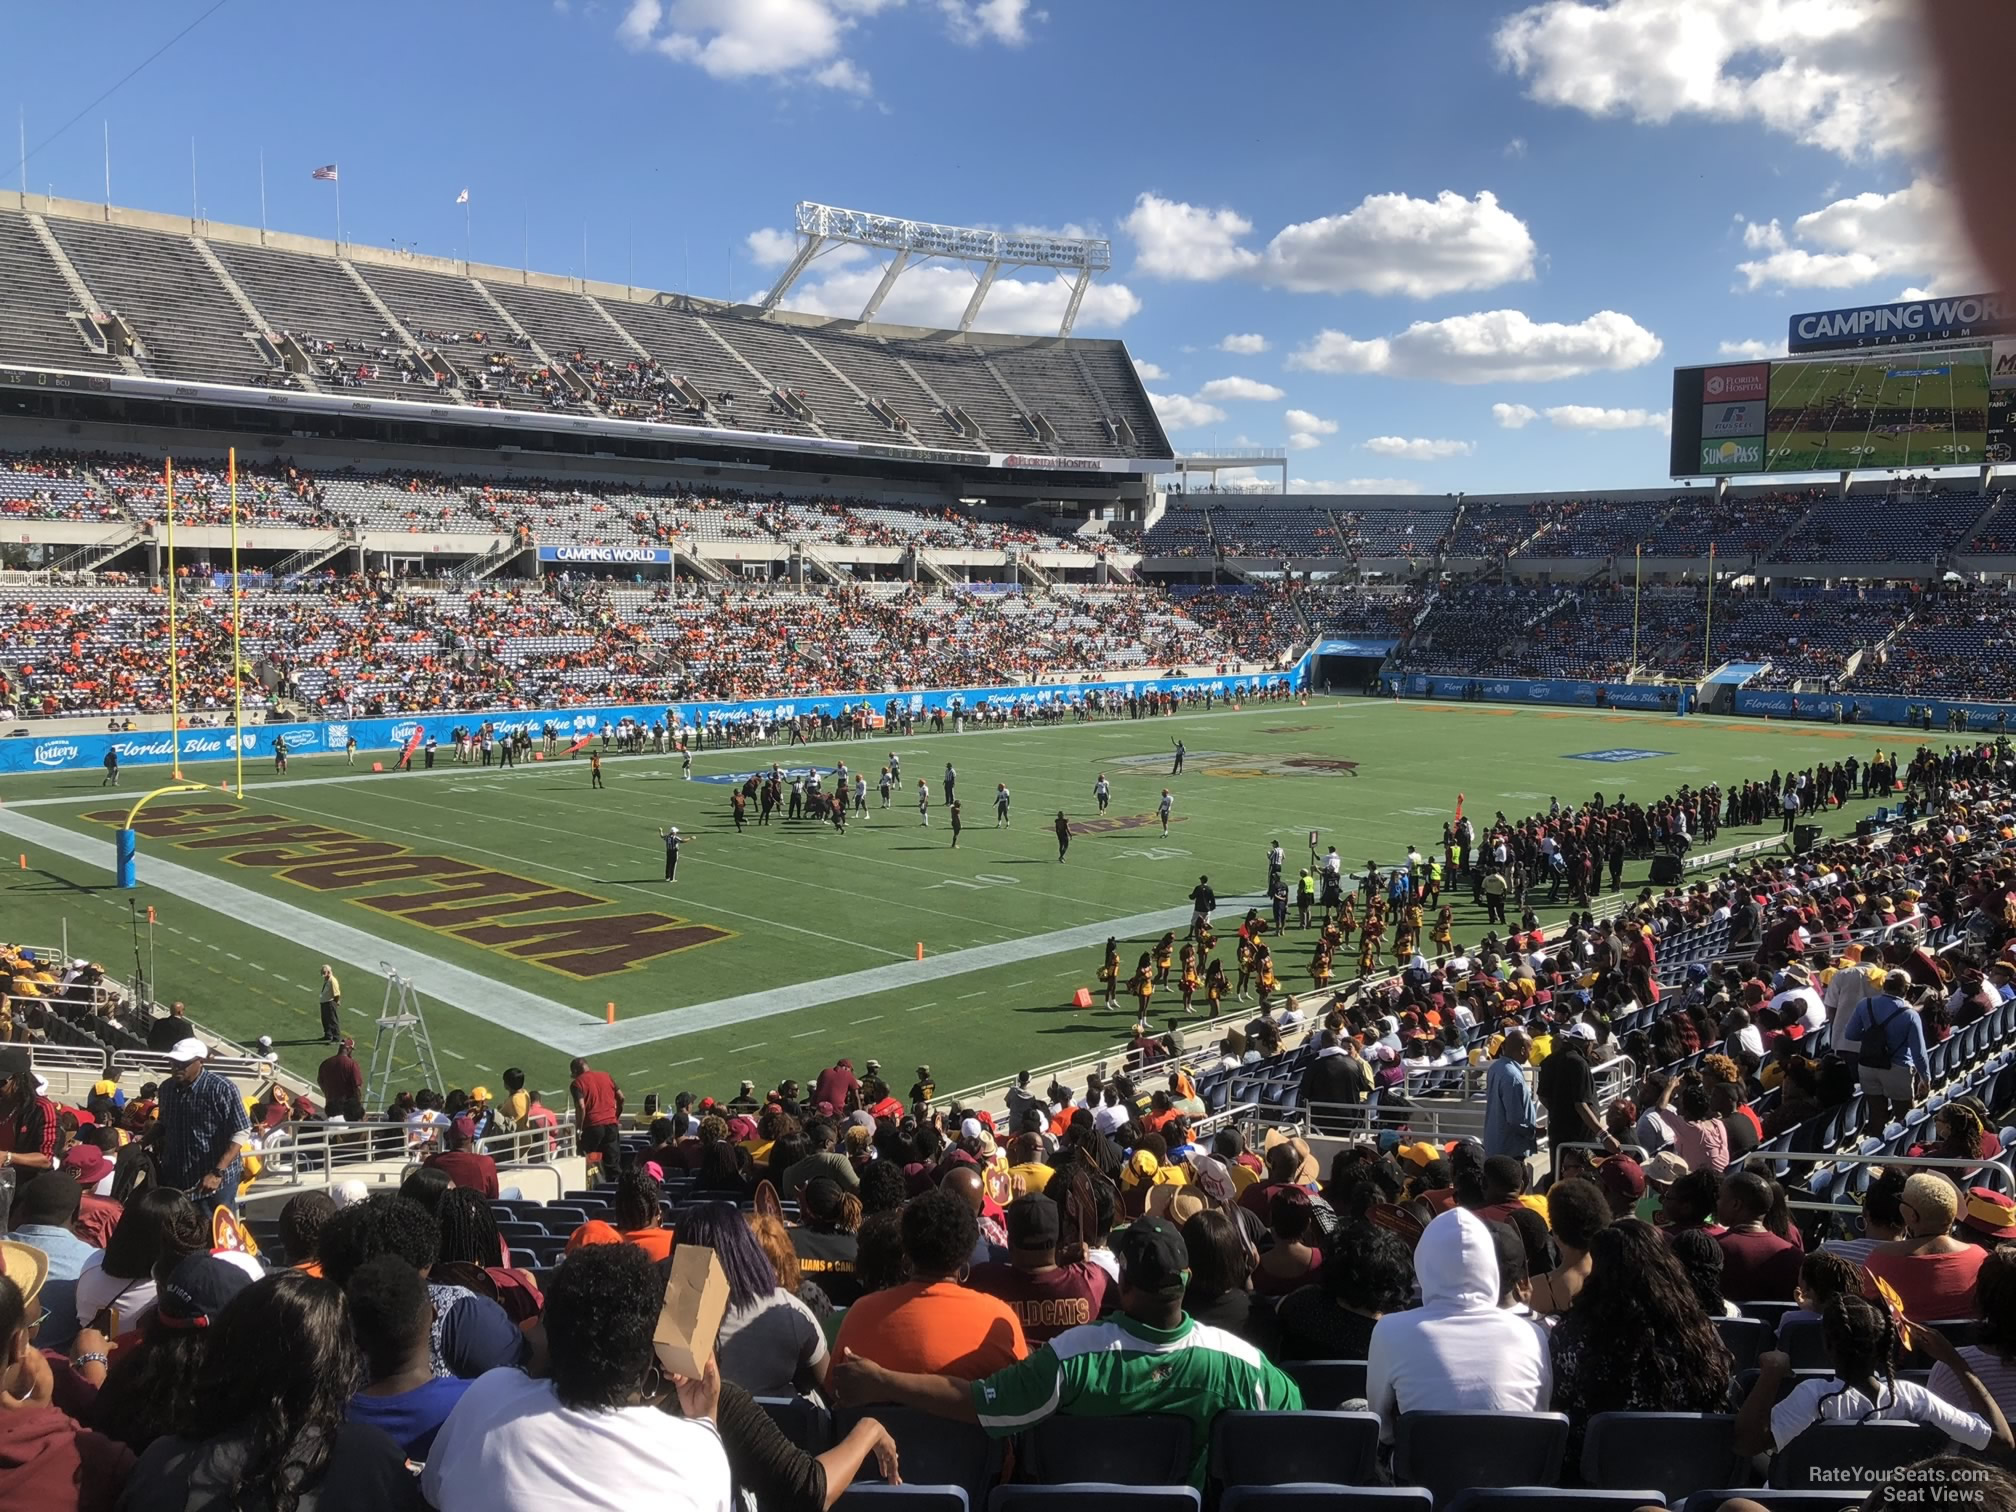 section 141, row ee seat view  for football - camping world stadium